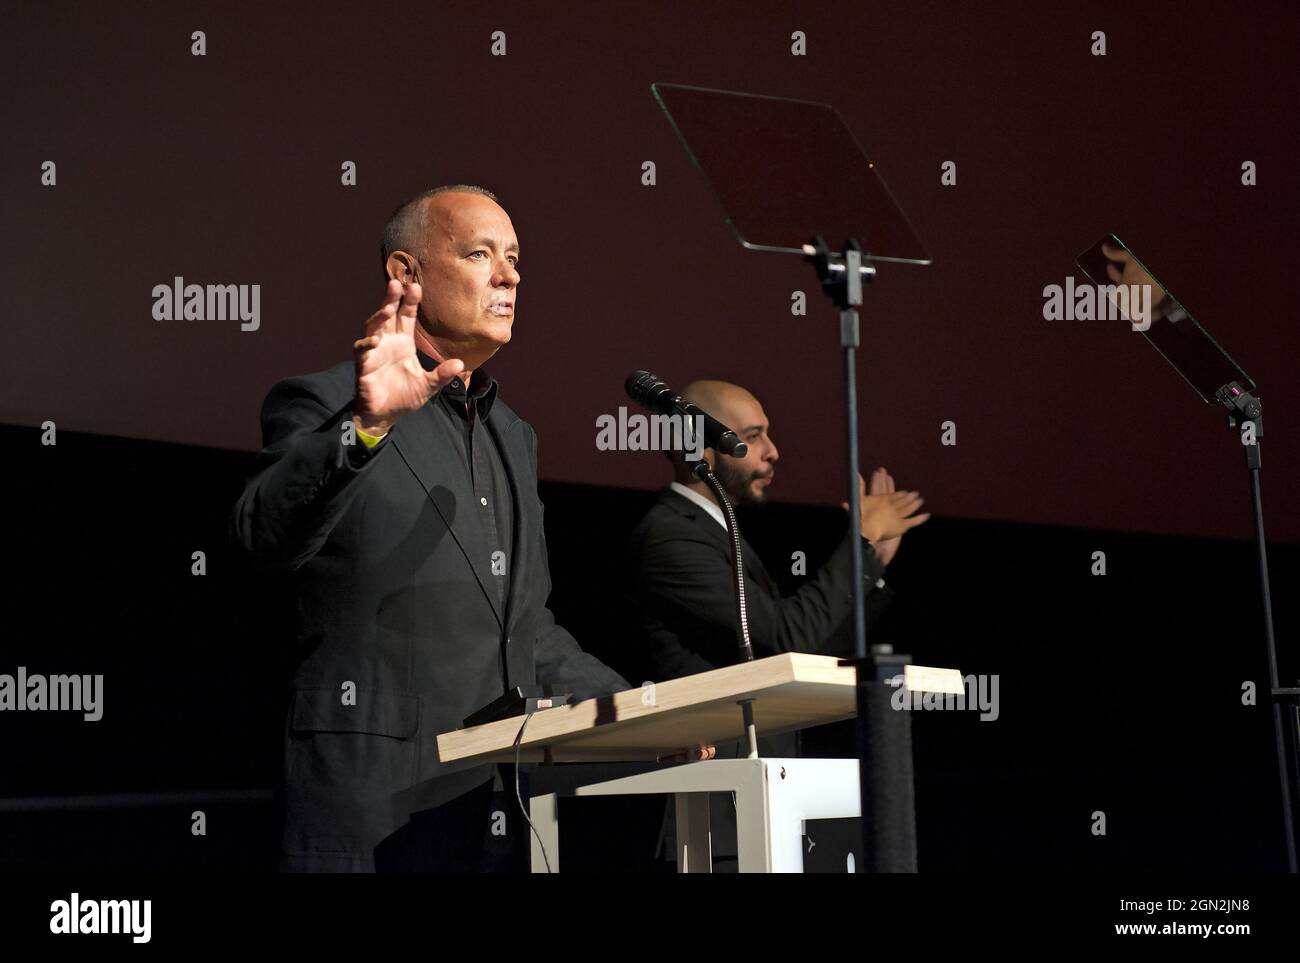 Tom Hanks speaking at the Academy Museum of Motion Pictures, Los Angeles, California Stock Photo